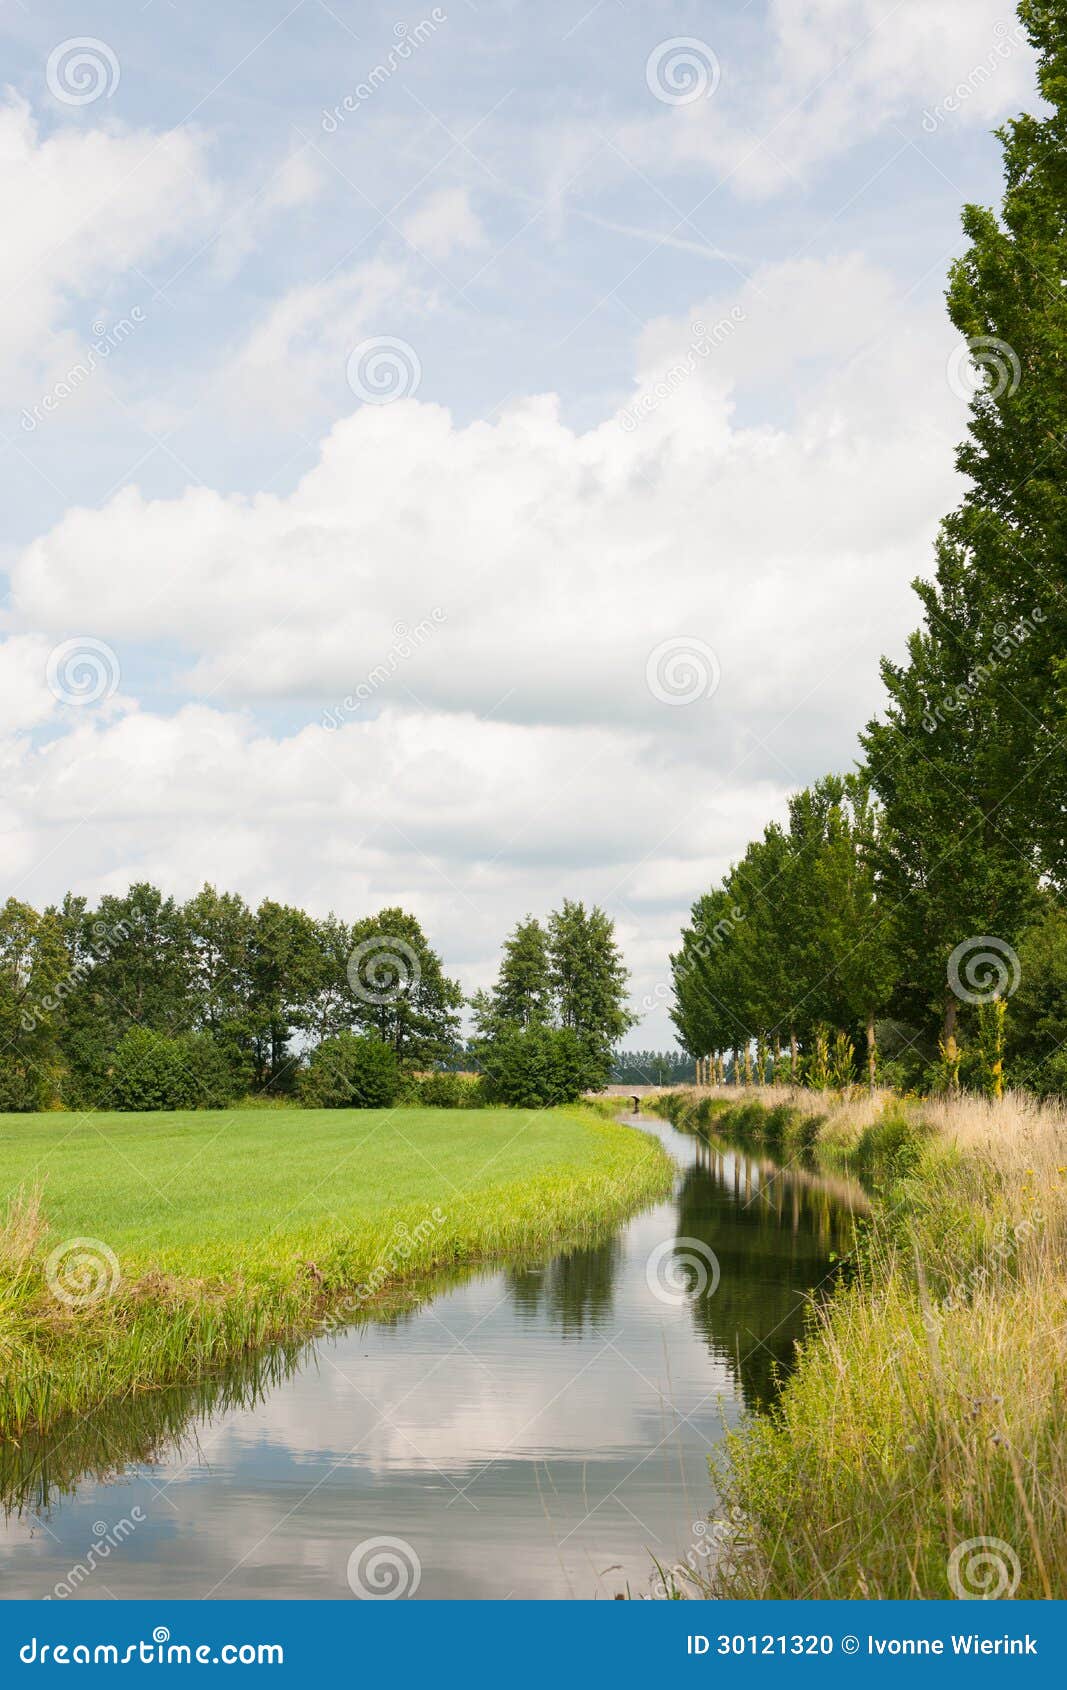 nature landscape with ditch and trees